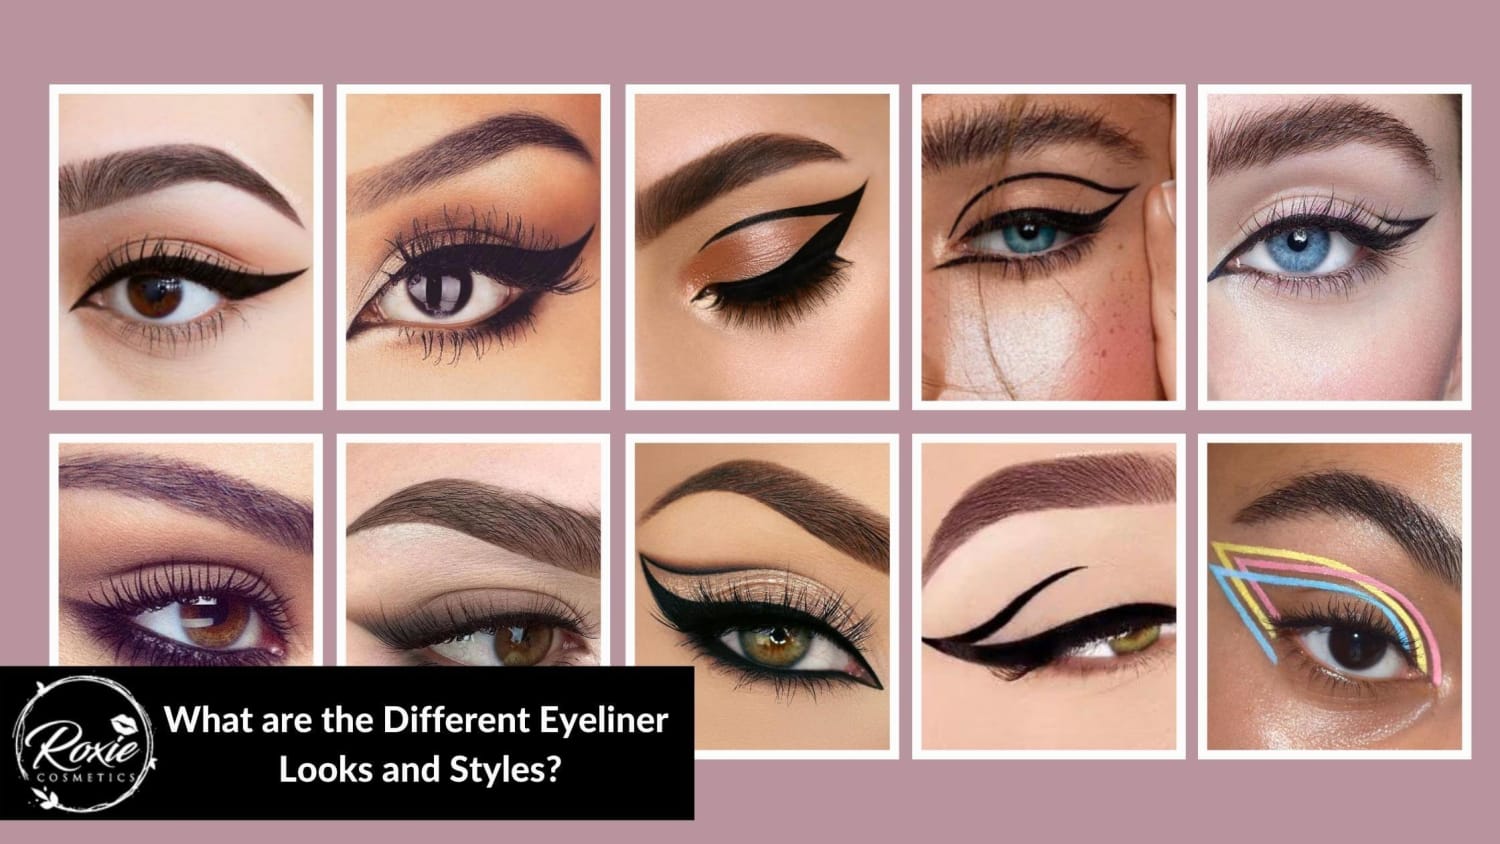 What are the Different Eyeliner Looks and Styles?